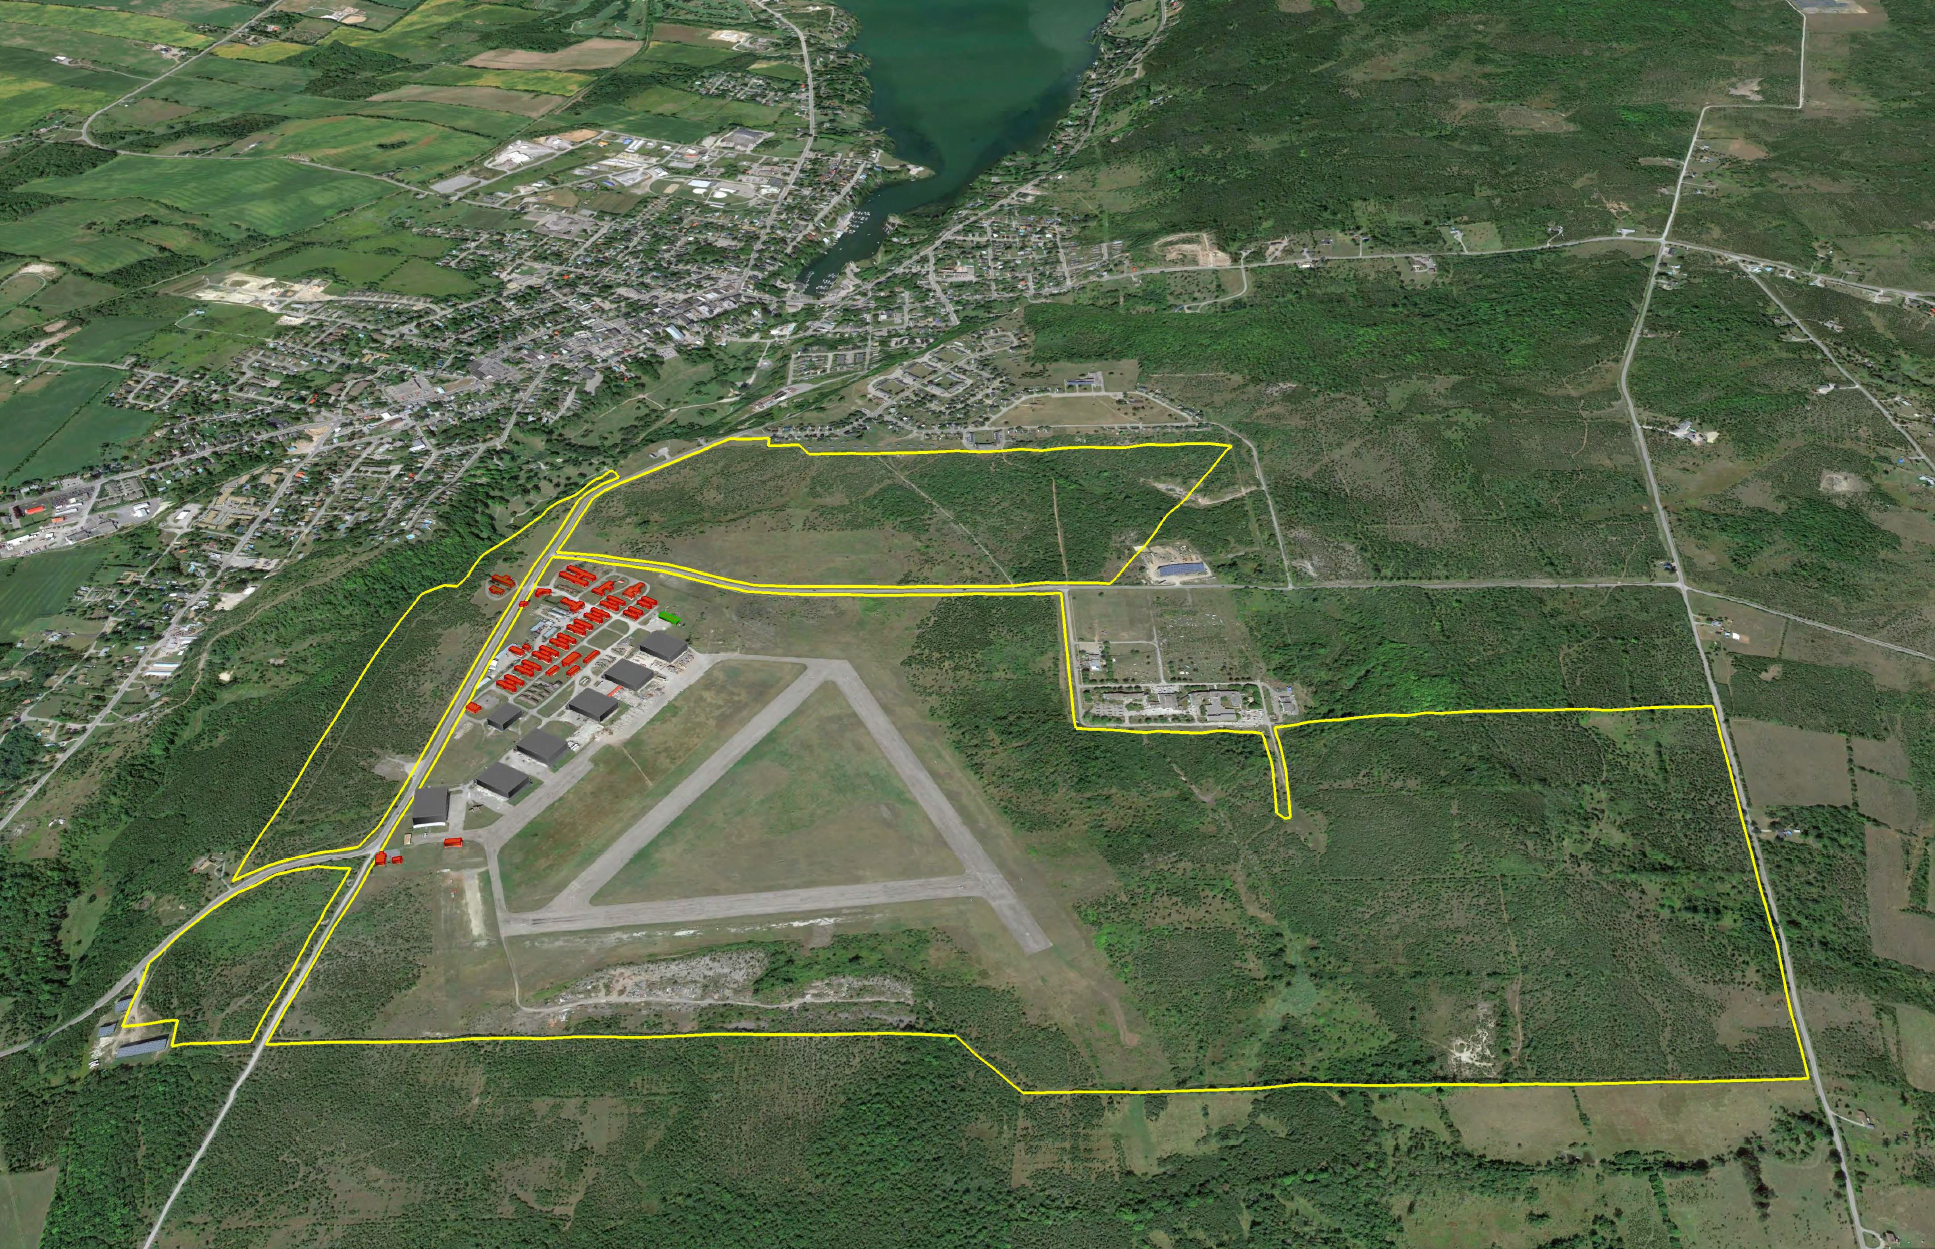 Aerial photo of Loch-Sloy business park and Picton Airport with clearly delineated border.